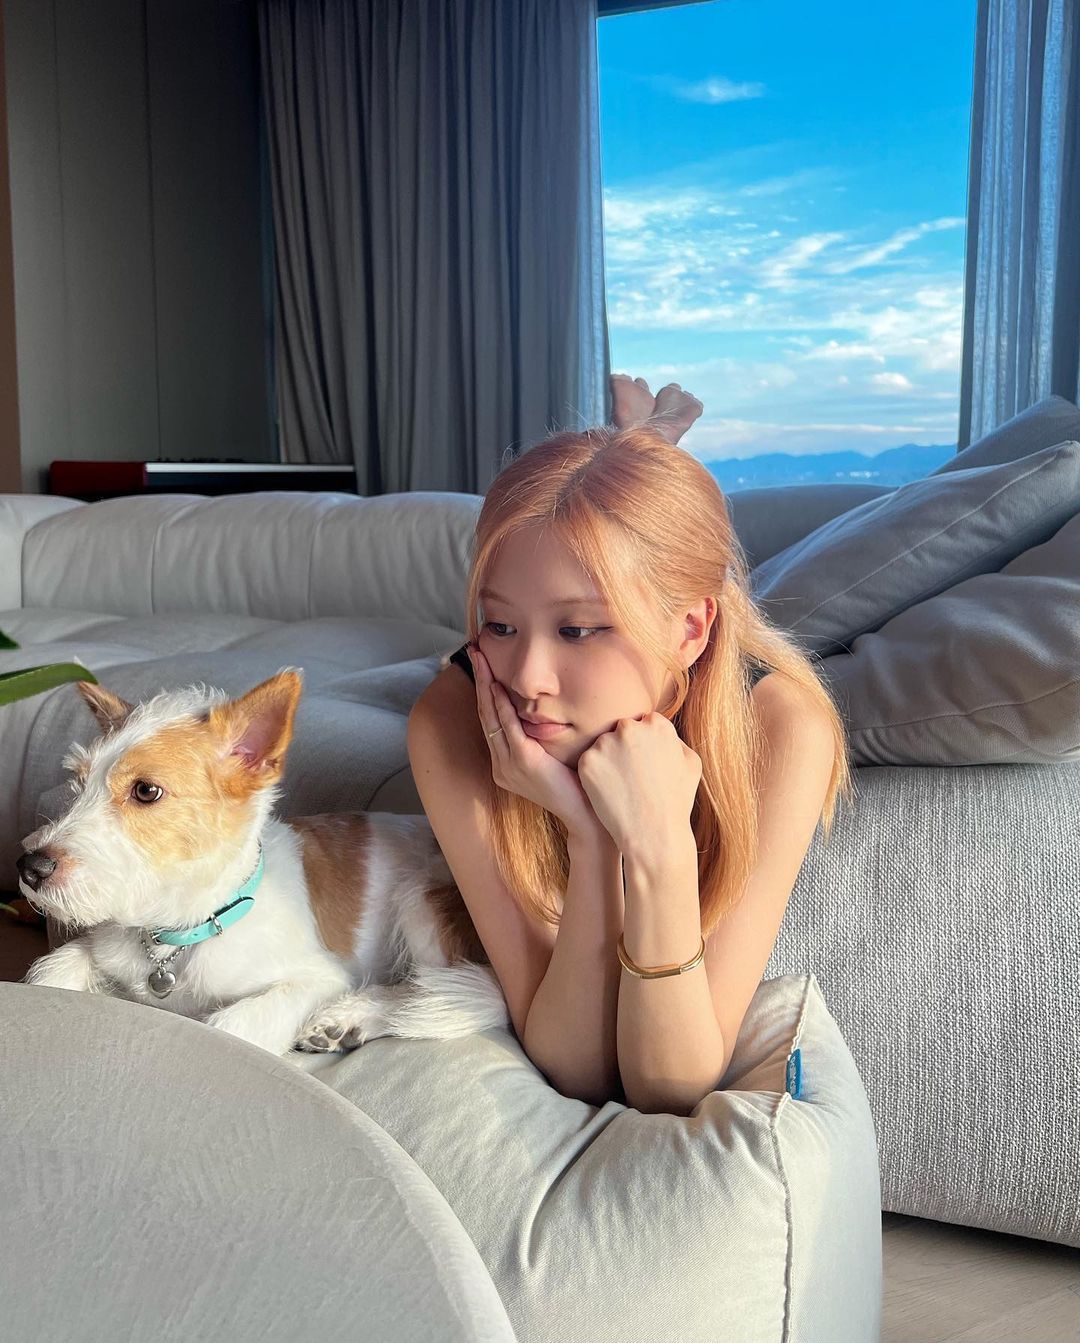 Rosé, a peaceful daily life with a dog.. Daily life is a pictorial